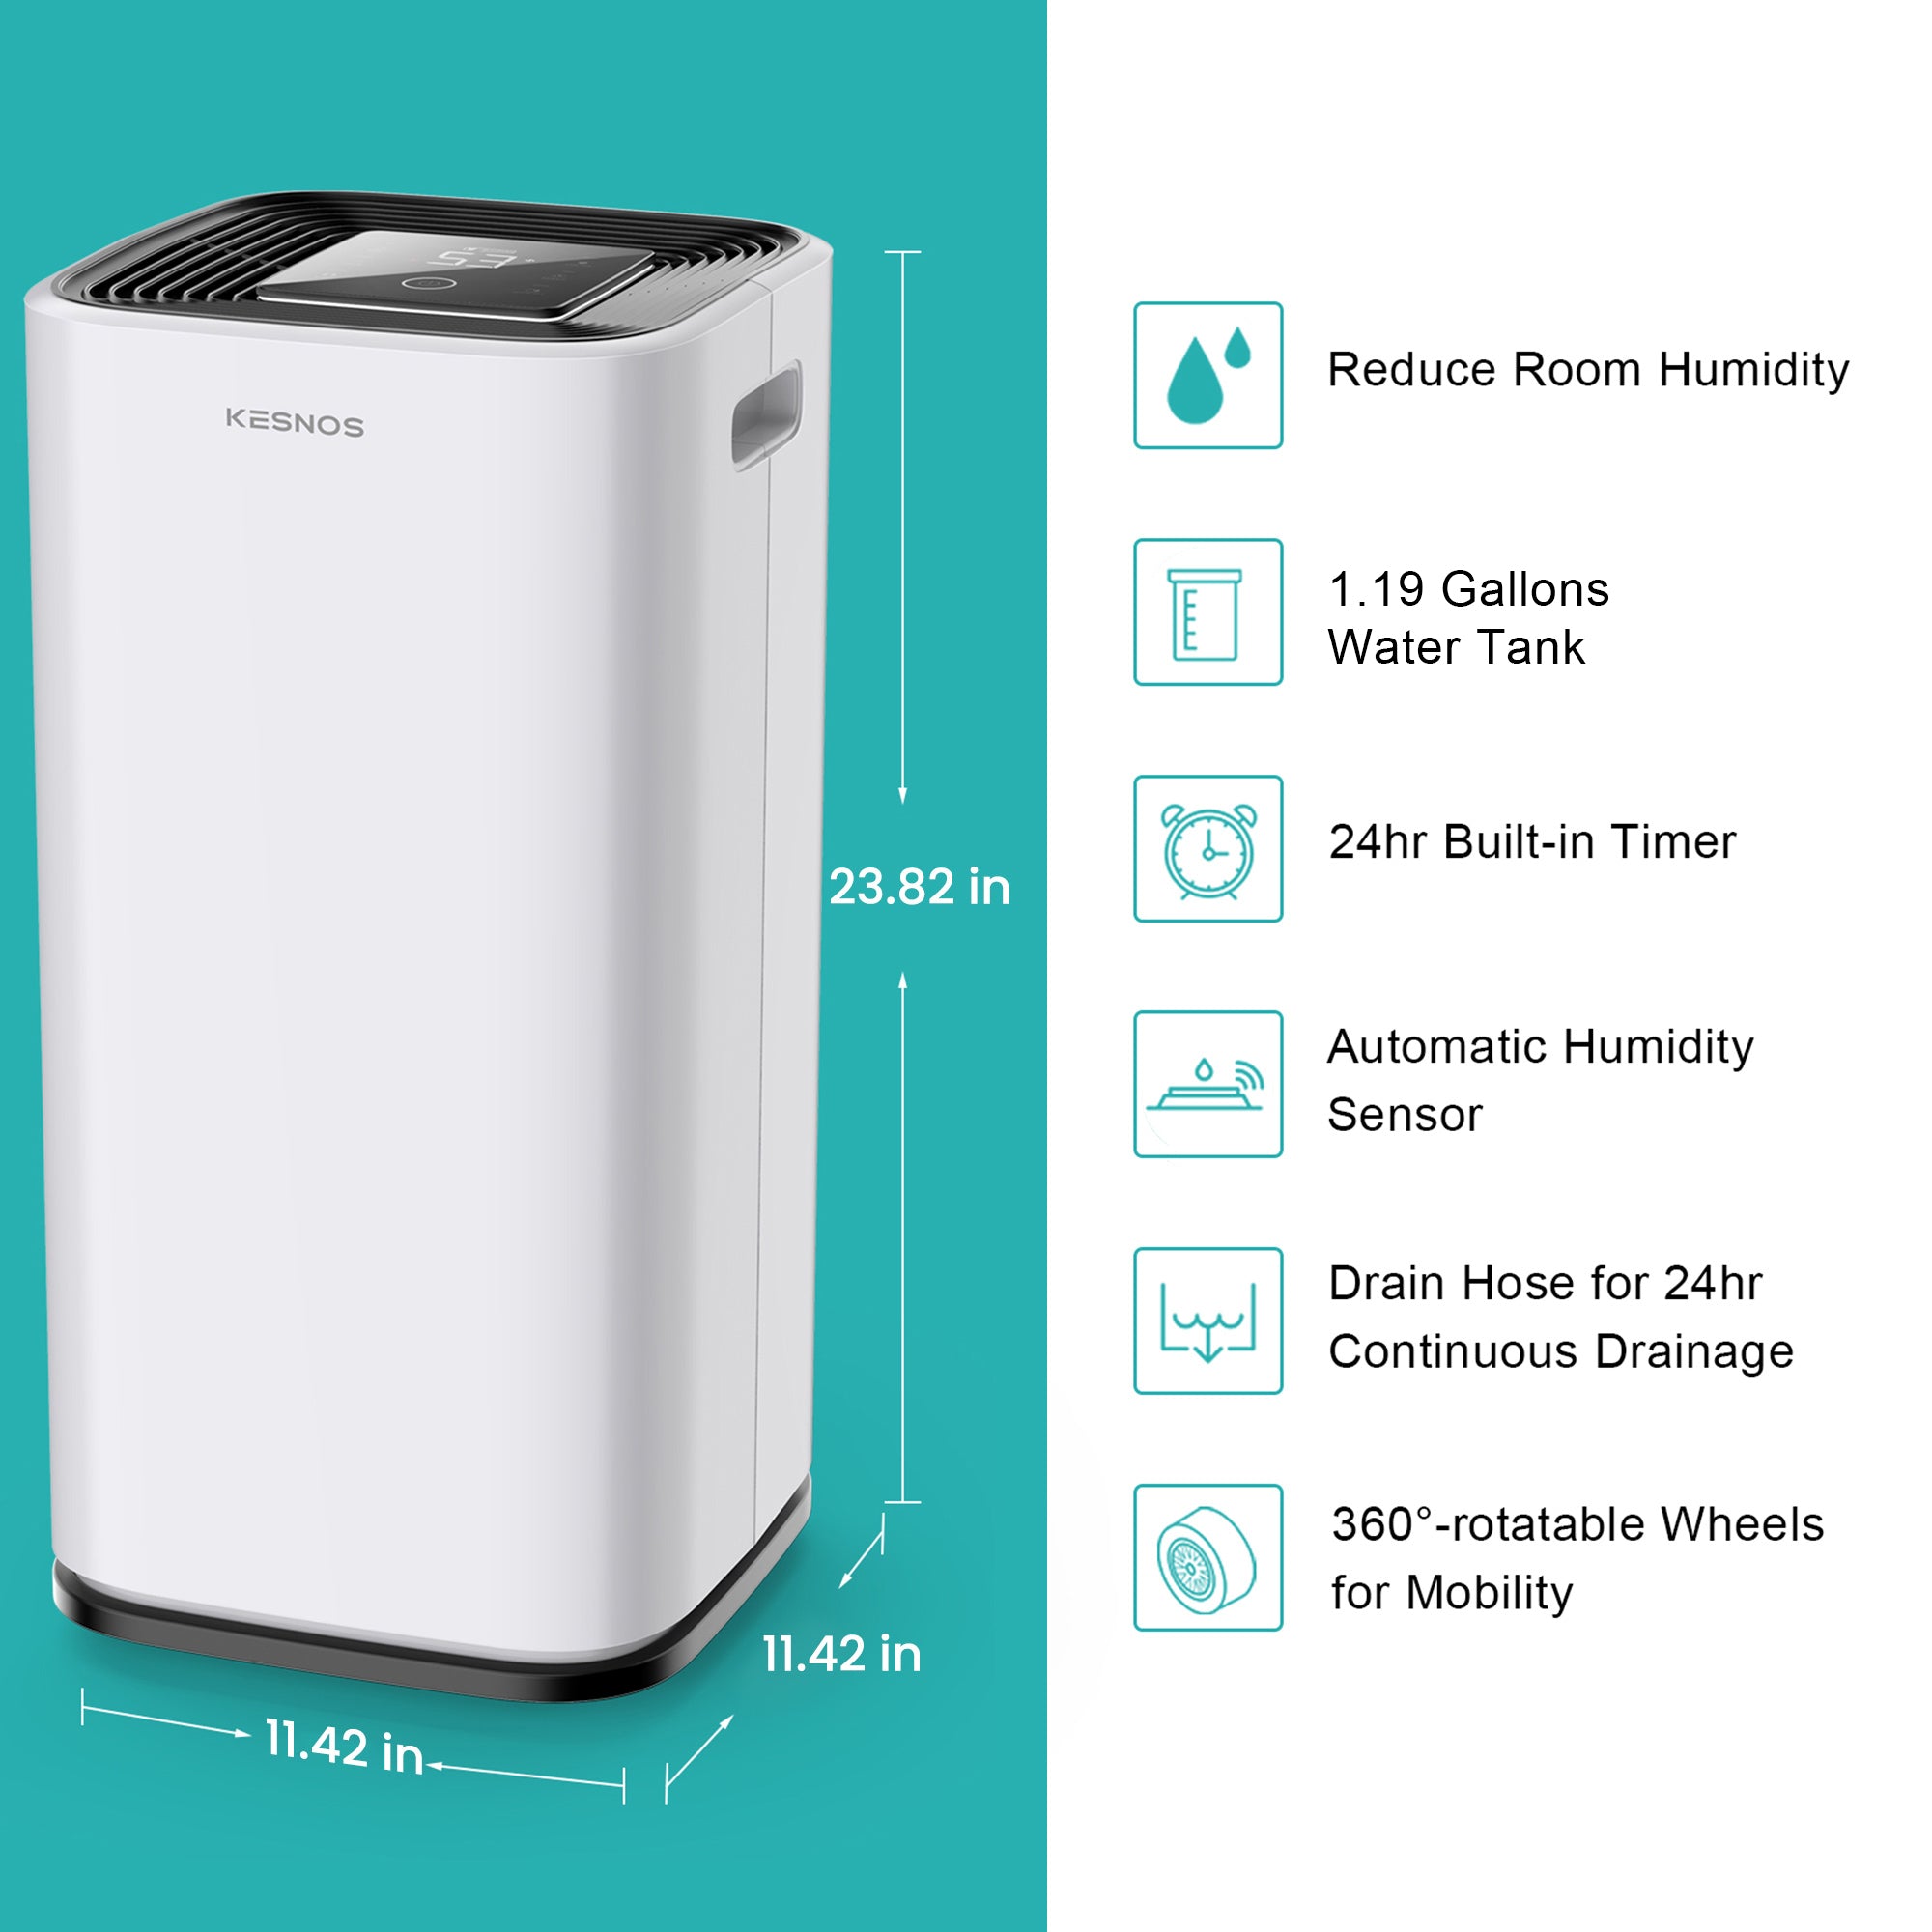 5000 Sq. Ft Large Dehumidifier for Home with Drain Hose and 1.19 Gallon Water Tank - Intelligent Touch Control and Low Noise, 24 Hr Timer Ideal for Basements, Bedrooms, Bathrooms, Laundry Rooms (Model: PD253D)